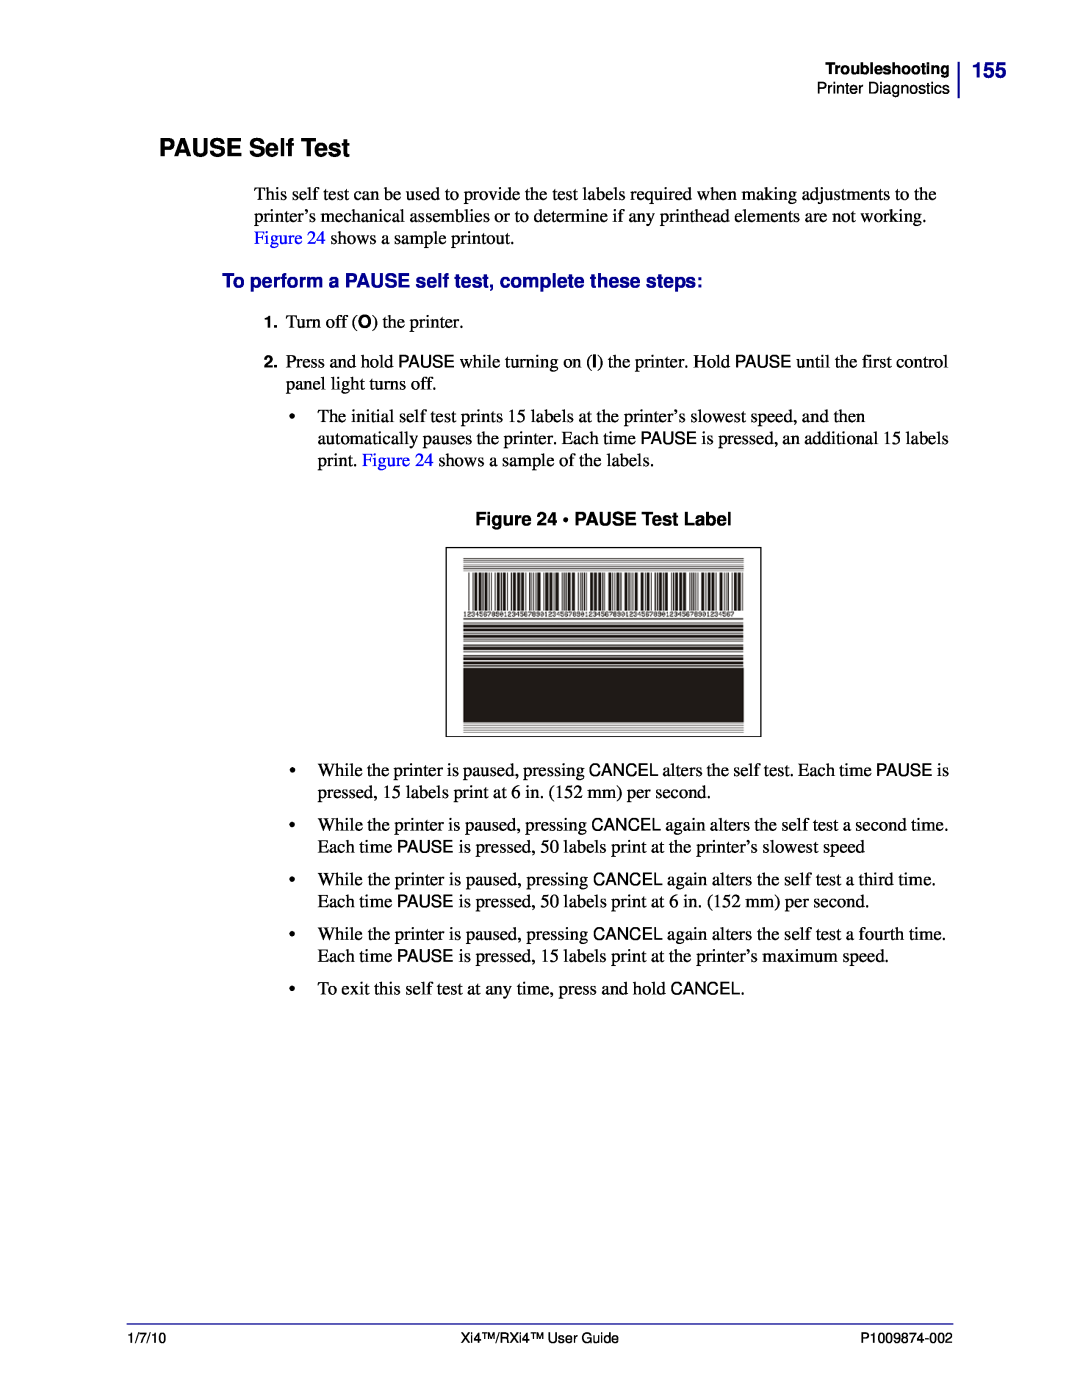 Zebra Technologies 11280100000 manual PAUSE Self Test, To perform a PAUSE self test, complete these steps, PAUSE Test Label 